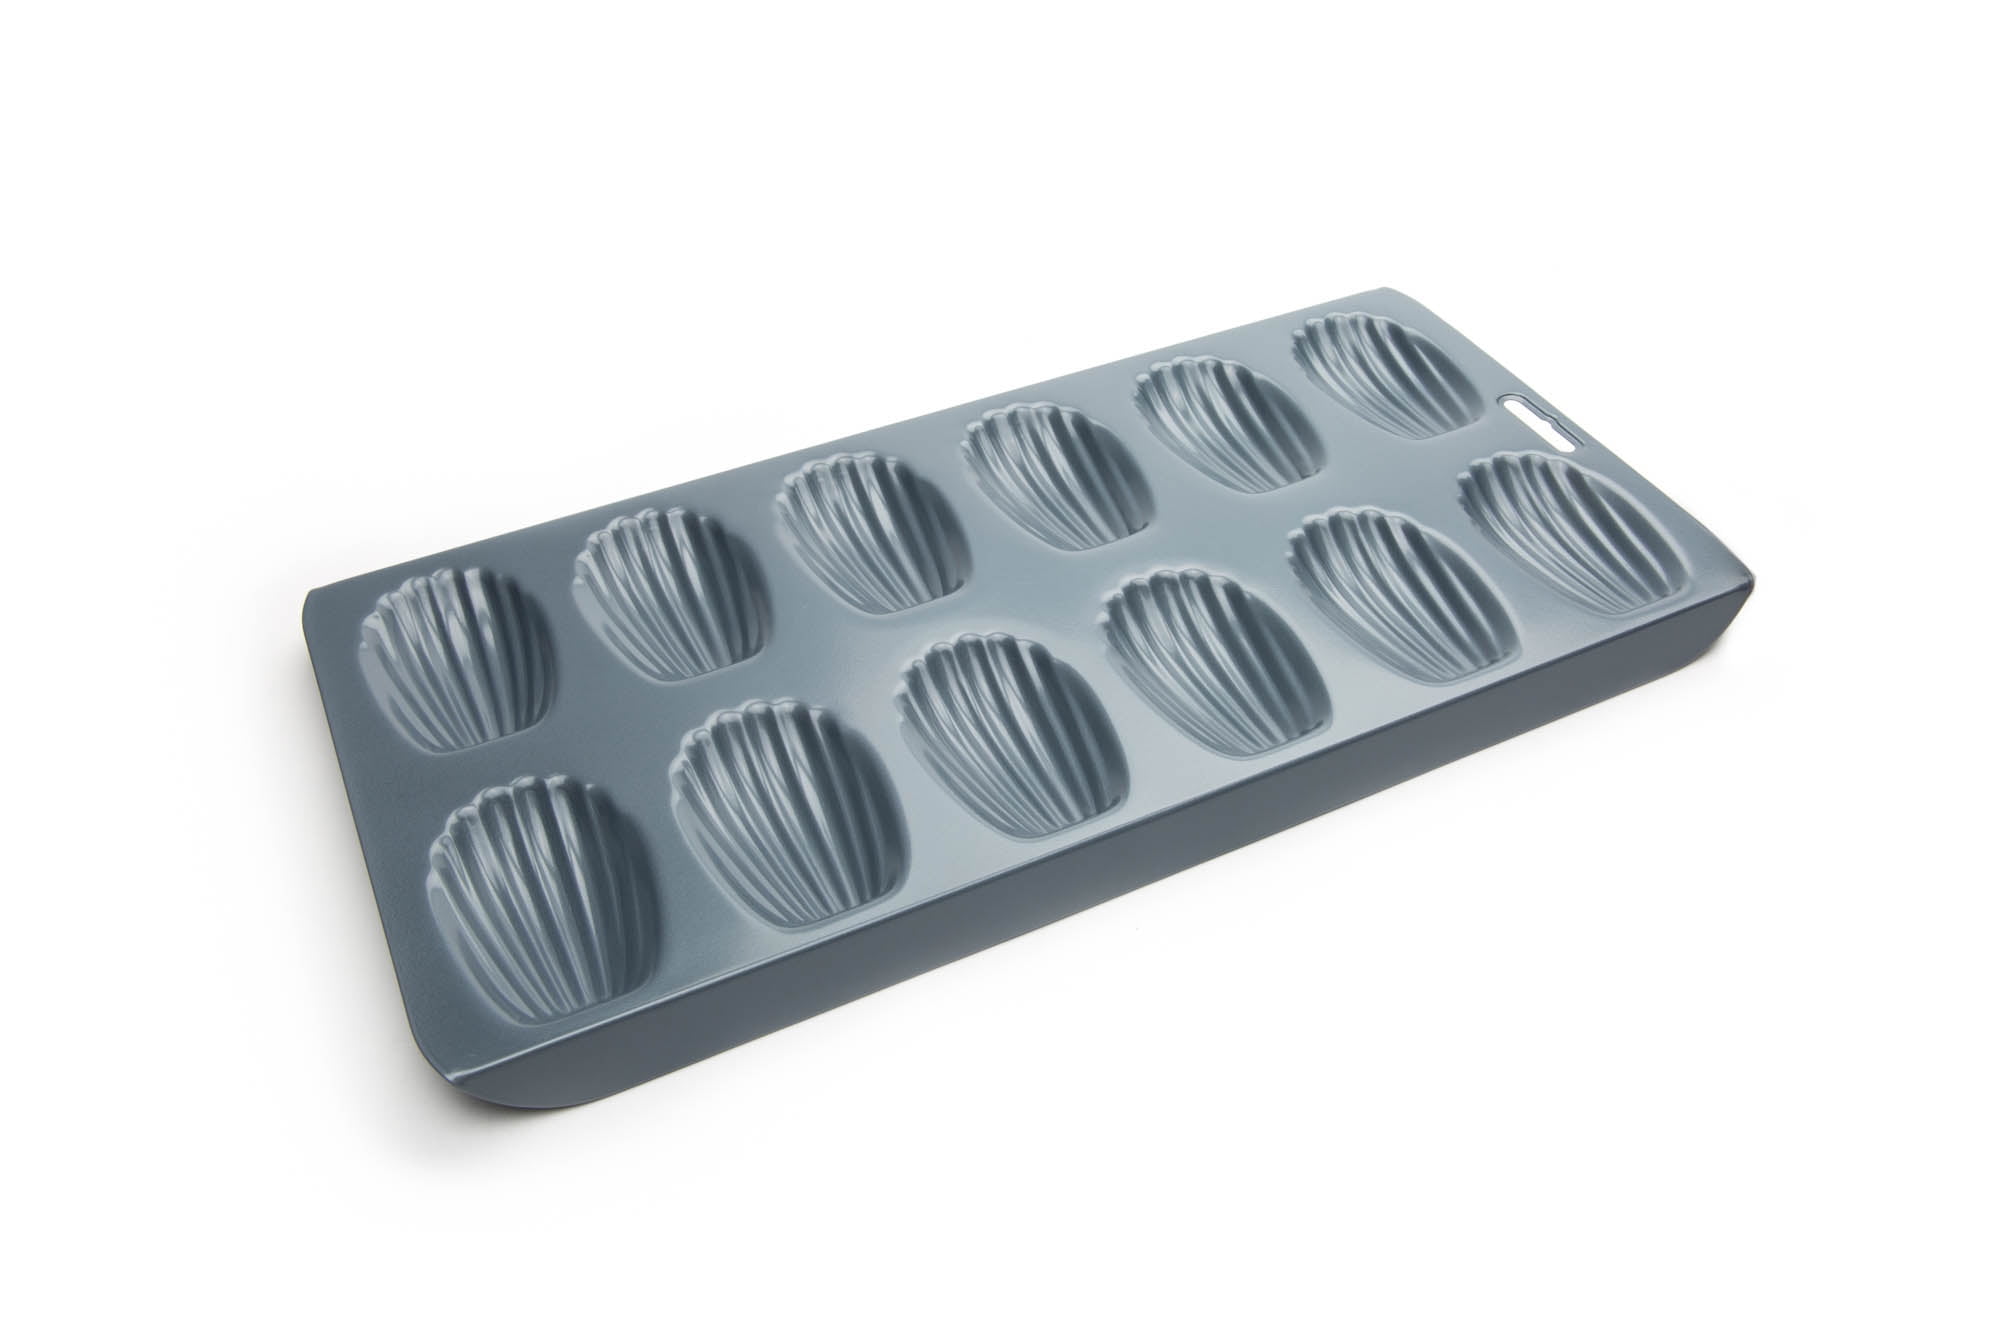 6 Holes,Gold Madeleine Tray,Metallic Professional Non-Stick 6 Hole Madeleine Bake Mold,Carbon Steel Madeleines Baking Tray DIY Durable Cake Mould Pan Mold For Madeline Cake Bread